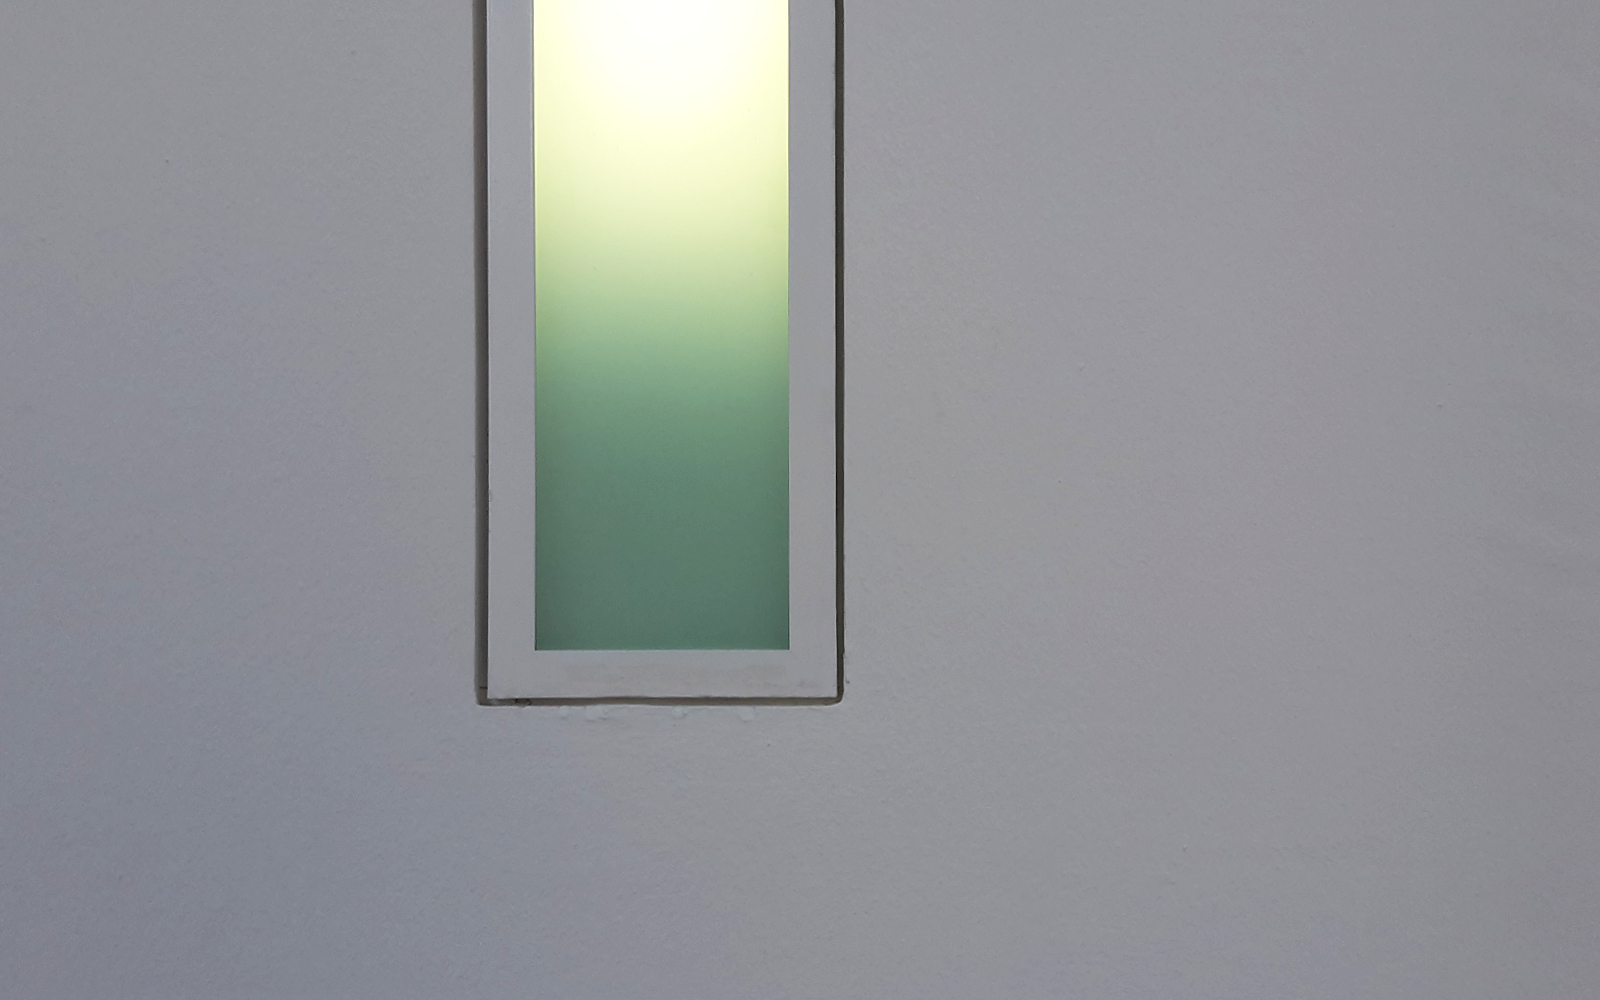 photograph of a wall light showing a color gradient